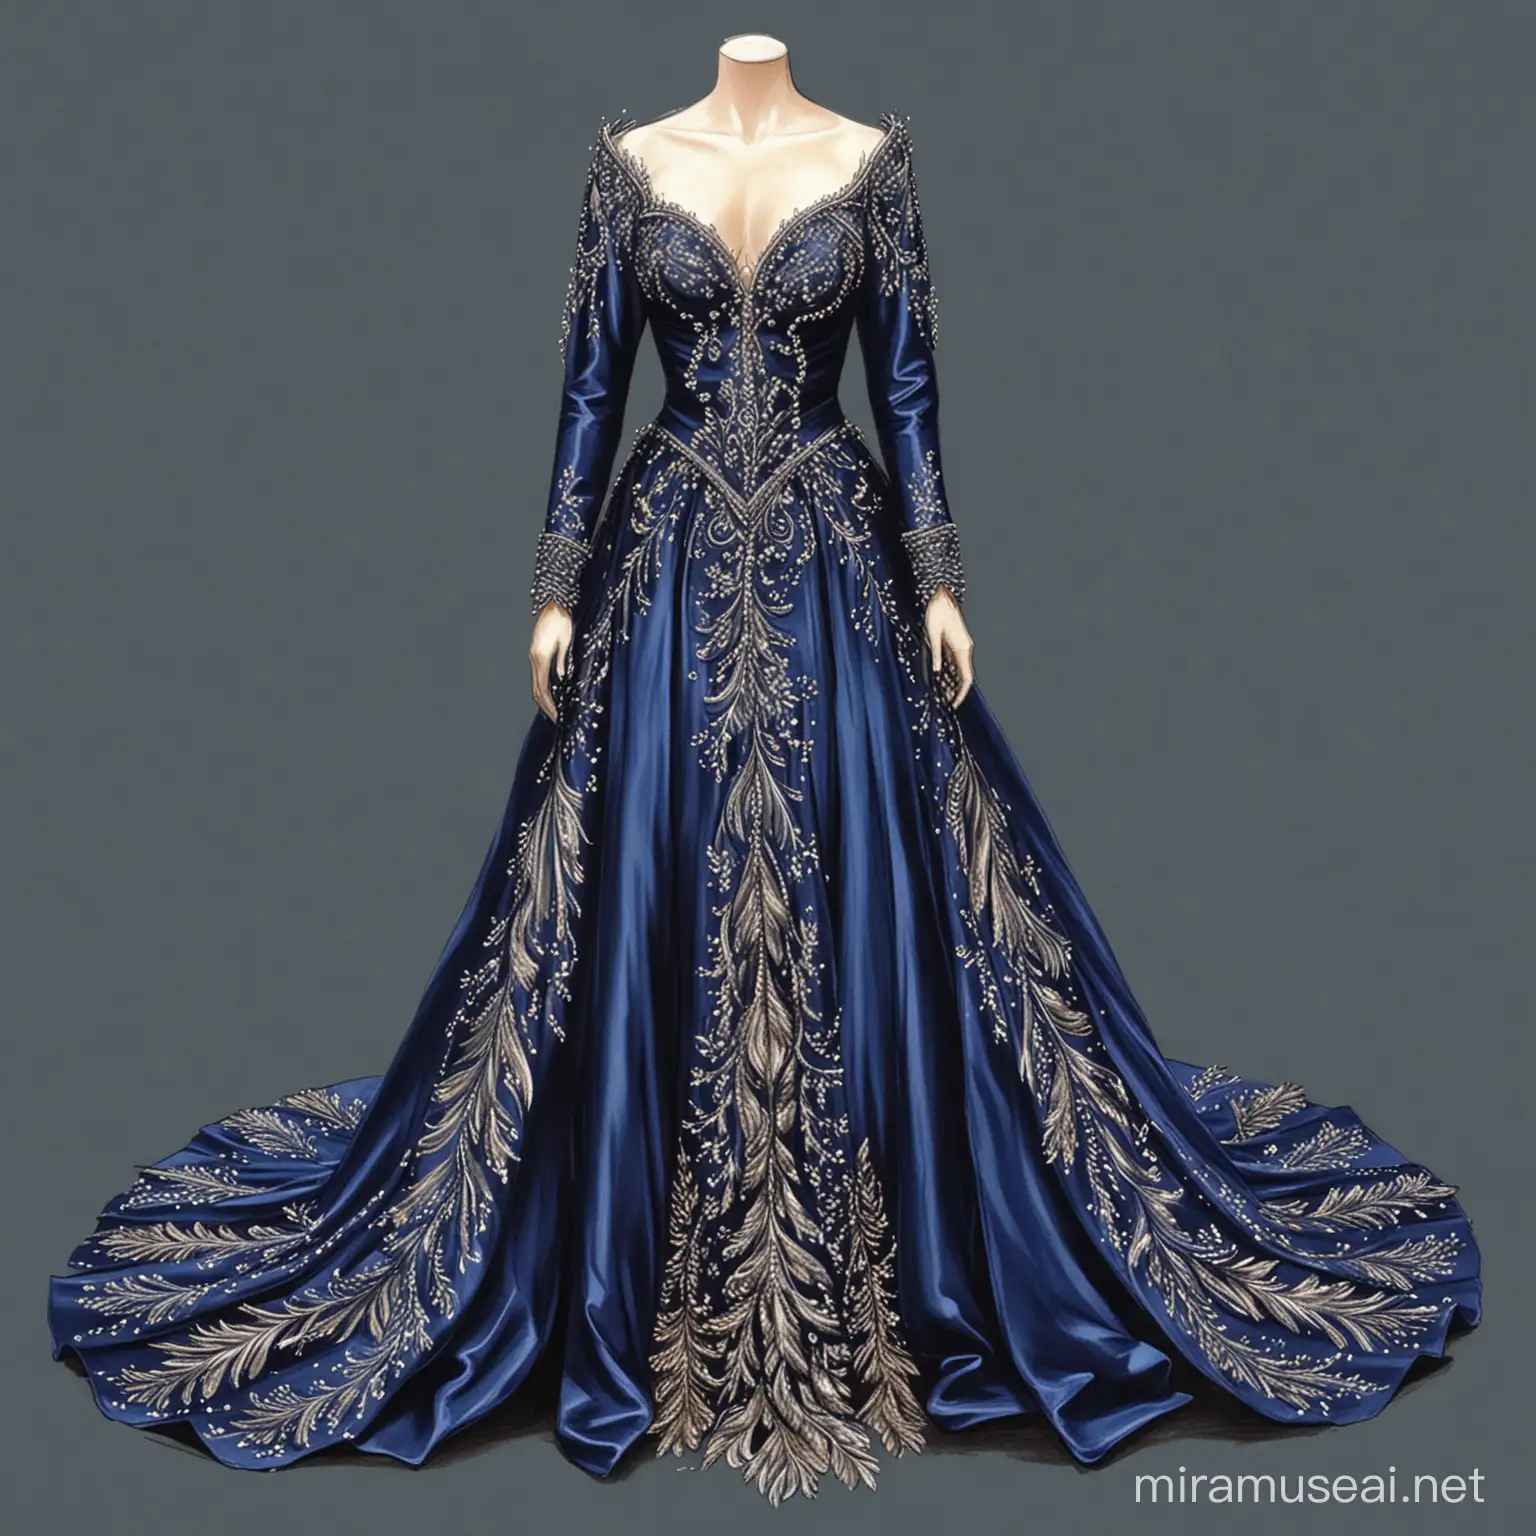 Sketch of A costume design, titled "Regal Elegance," features a floor-length gown in deep royal blue satin adorned with intricate embroidery, delicate sequins, and cascading feathers, exuding a sense of regal sophistication and timeless beauty.